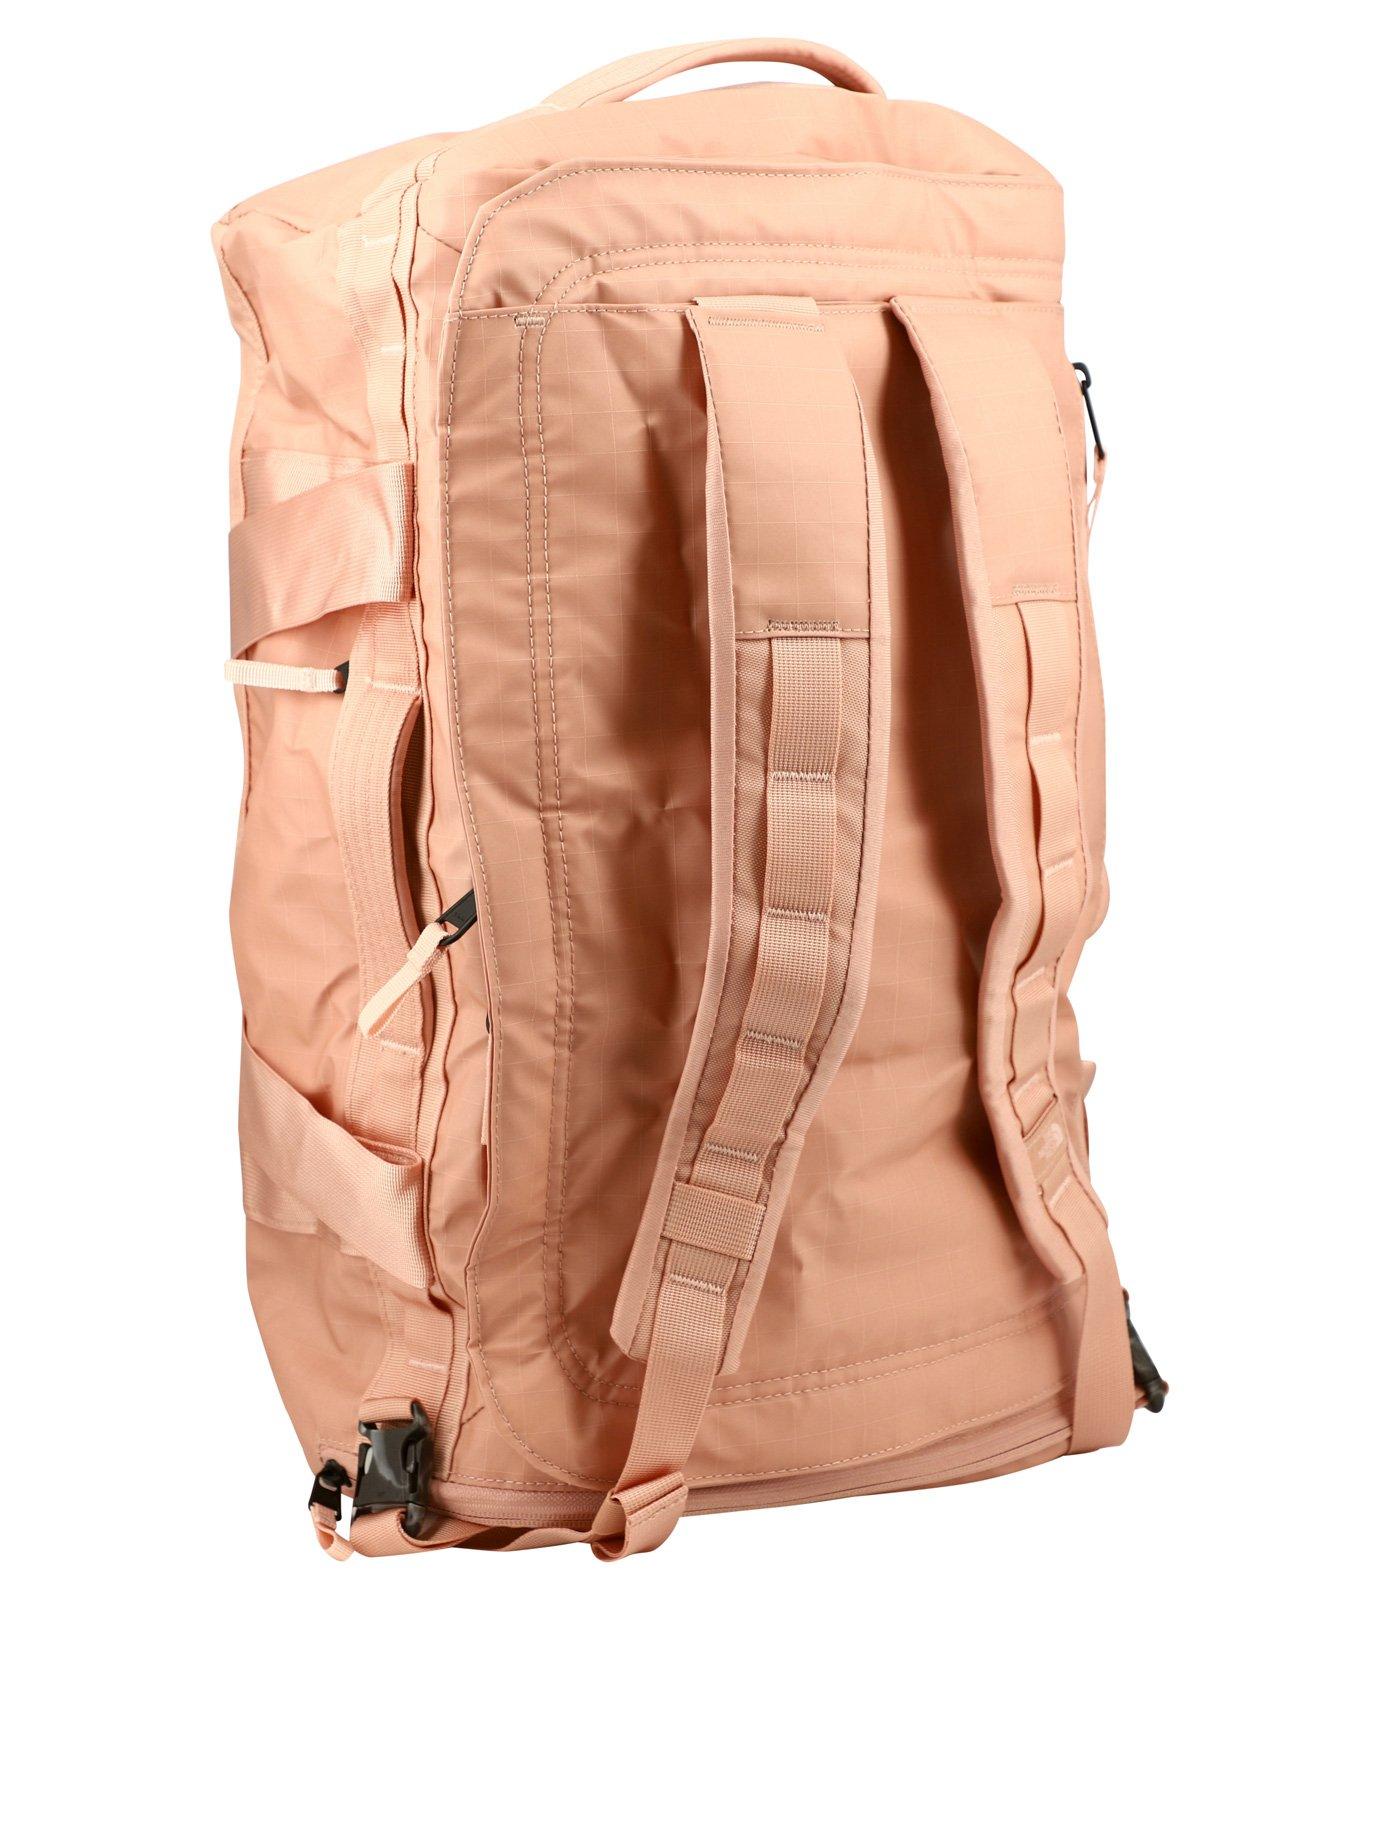 The North Face Synthetic Base Camp Voyager Duffel Bag in Pink | Lyst